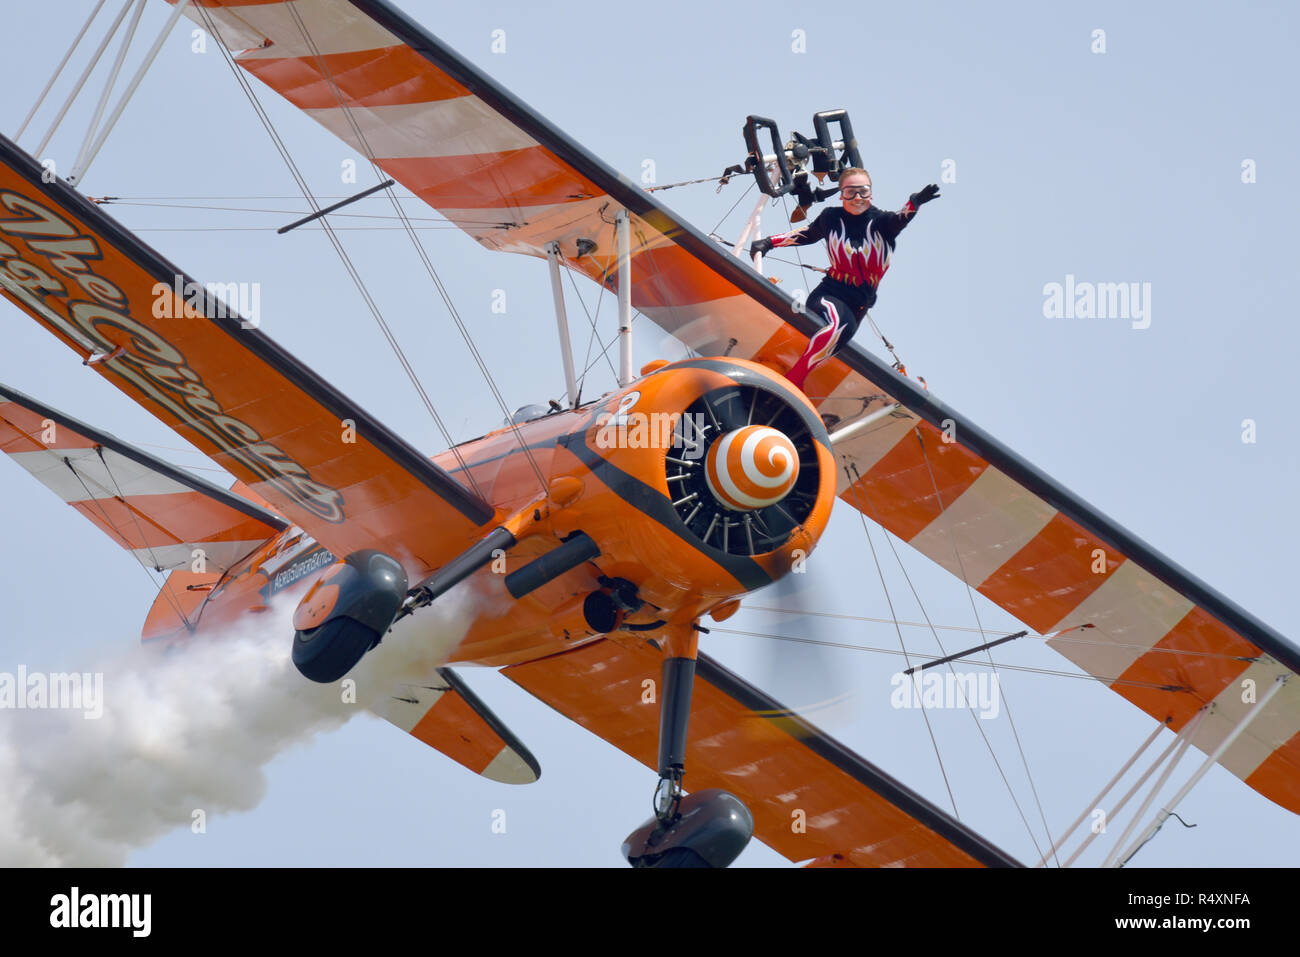 The Flying Circus, formerly Breitling, Wingwalkers wingwalking display team flying at an airshow. Boeing Stearman biplane plane with girl on wing Stock Photo